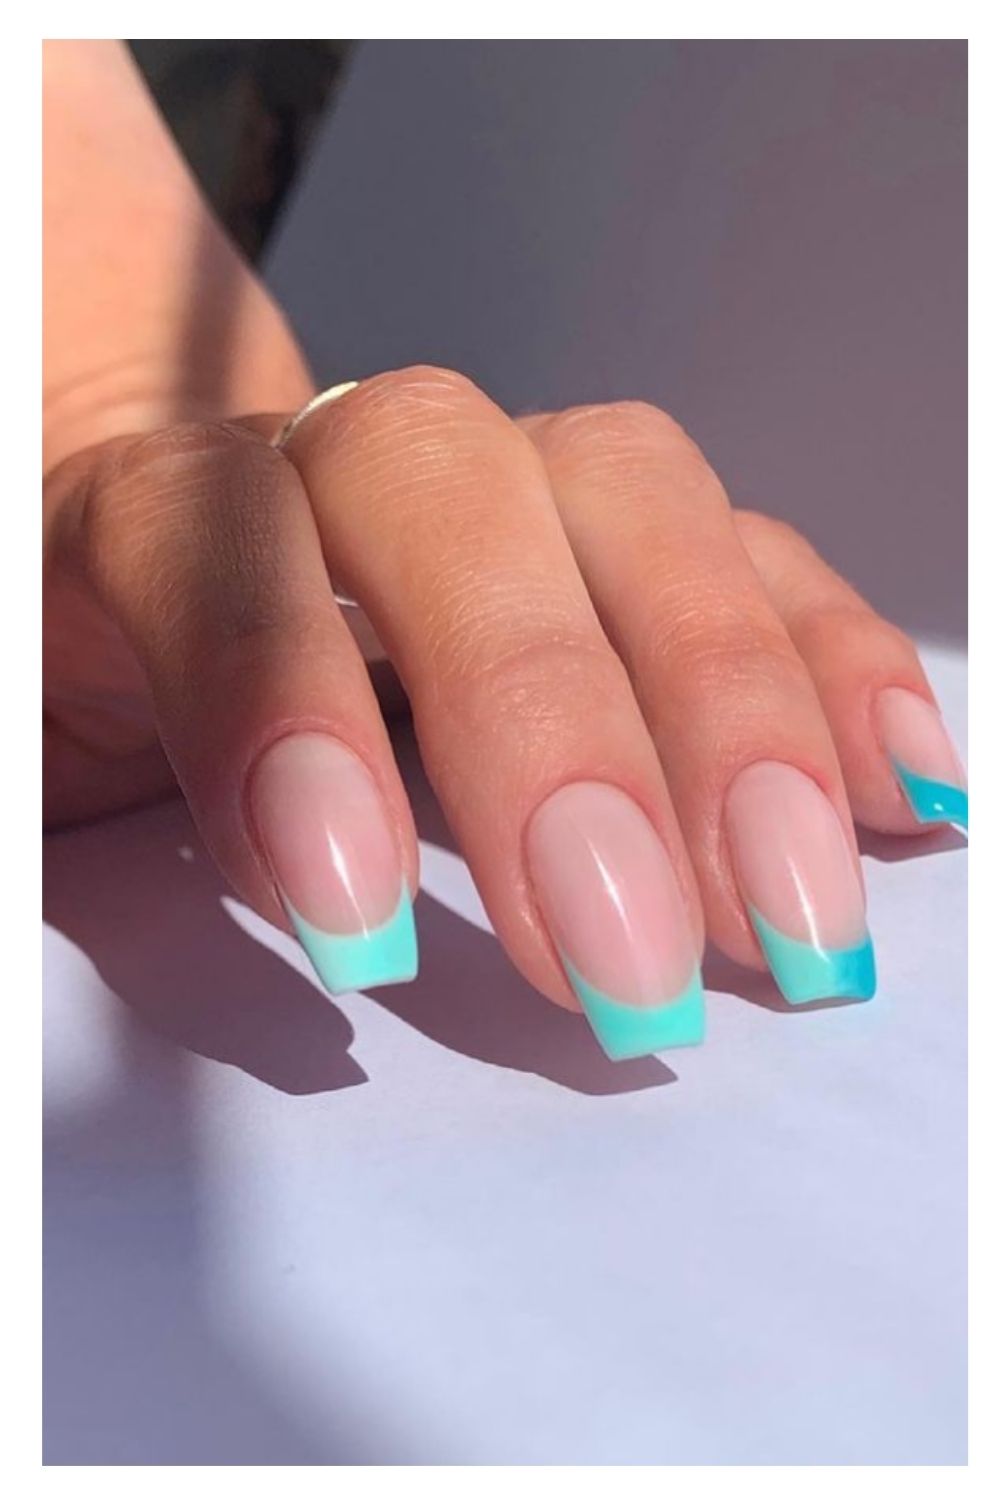 30 Best Summer Nail Designs and Ideas For April 2021